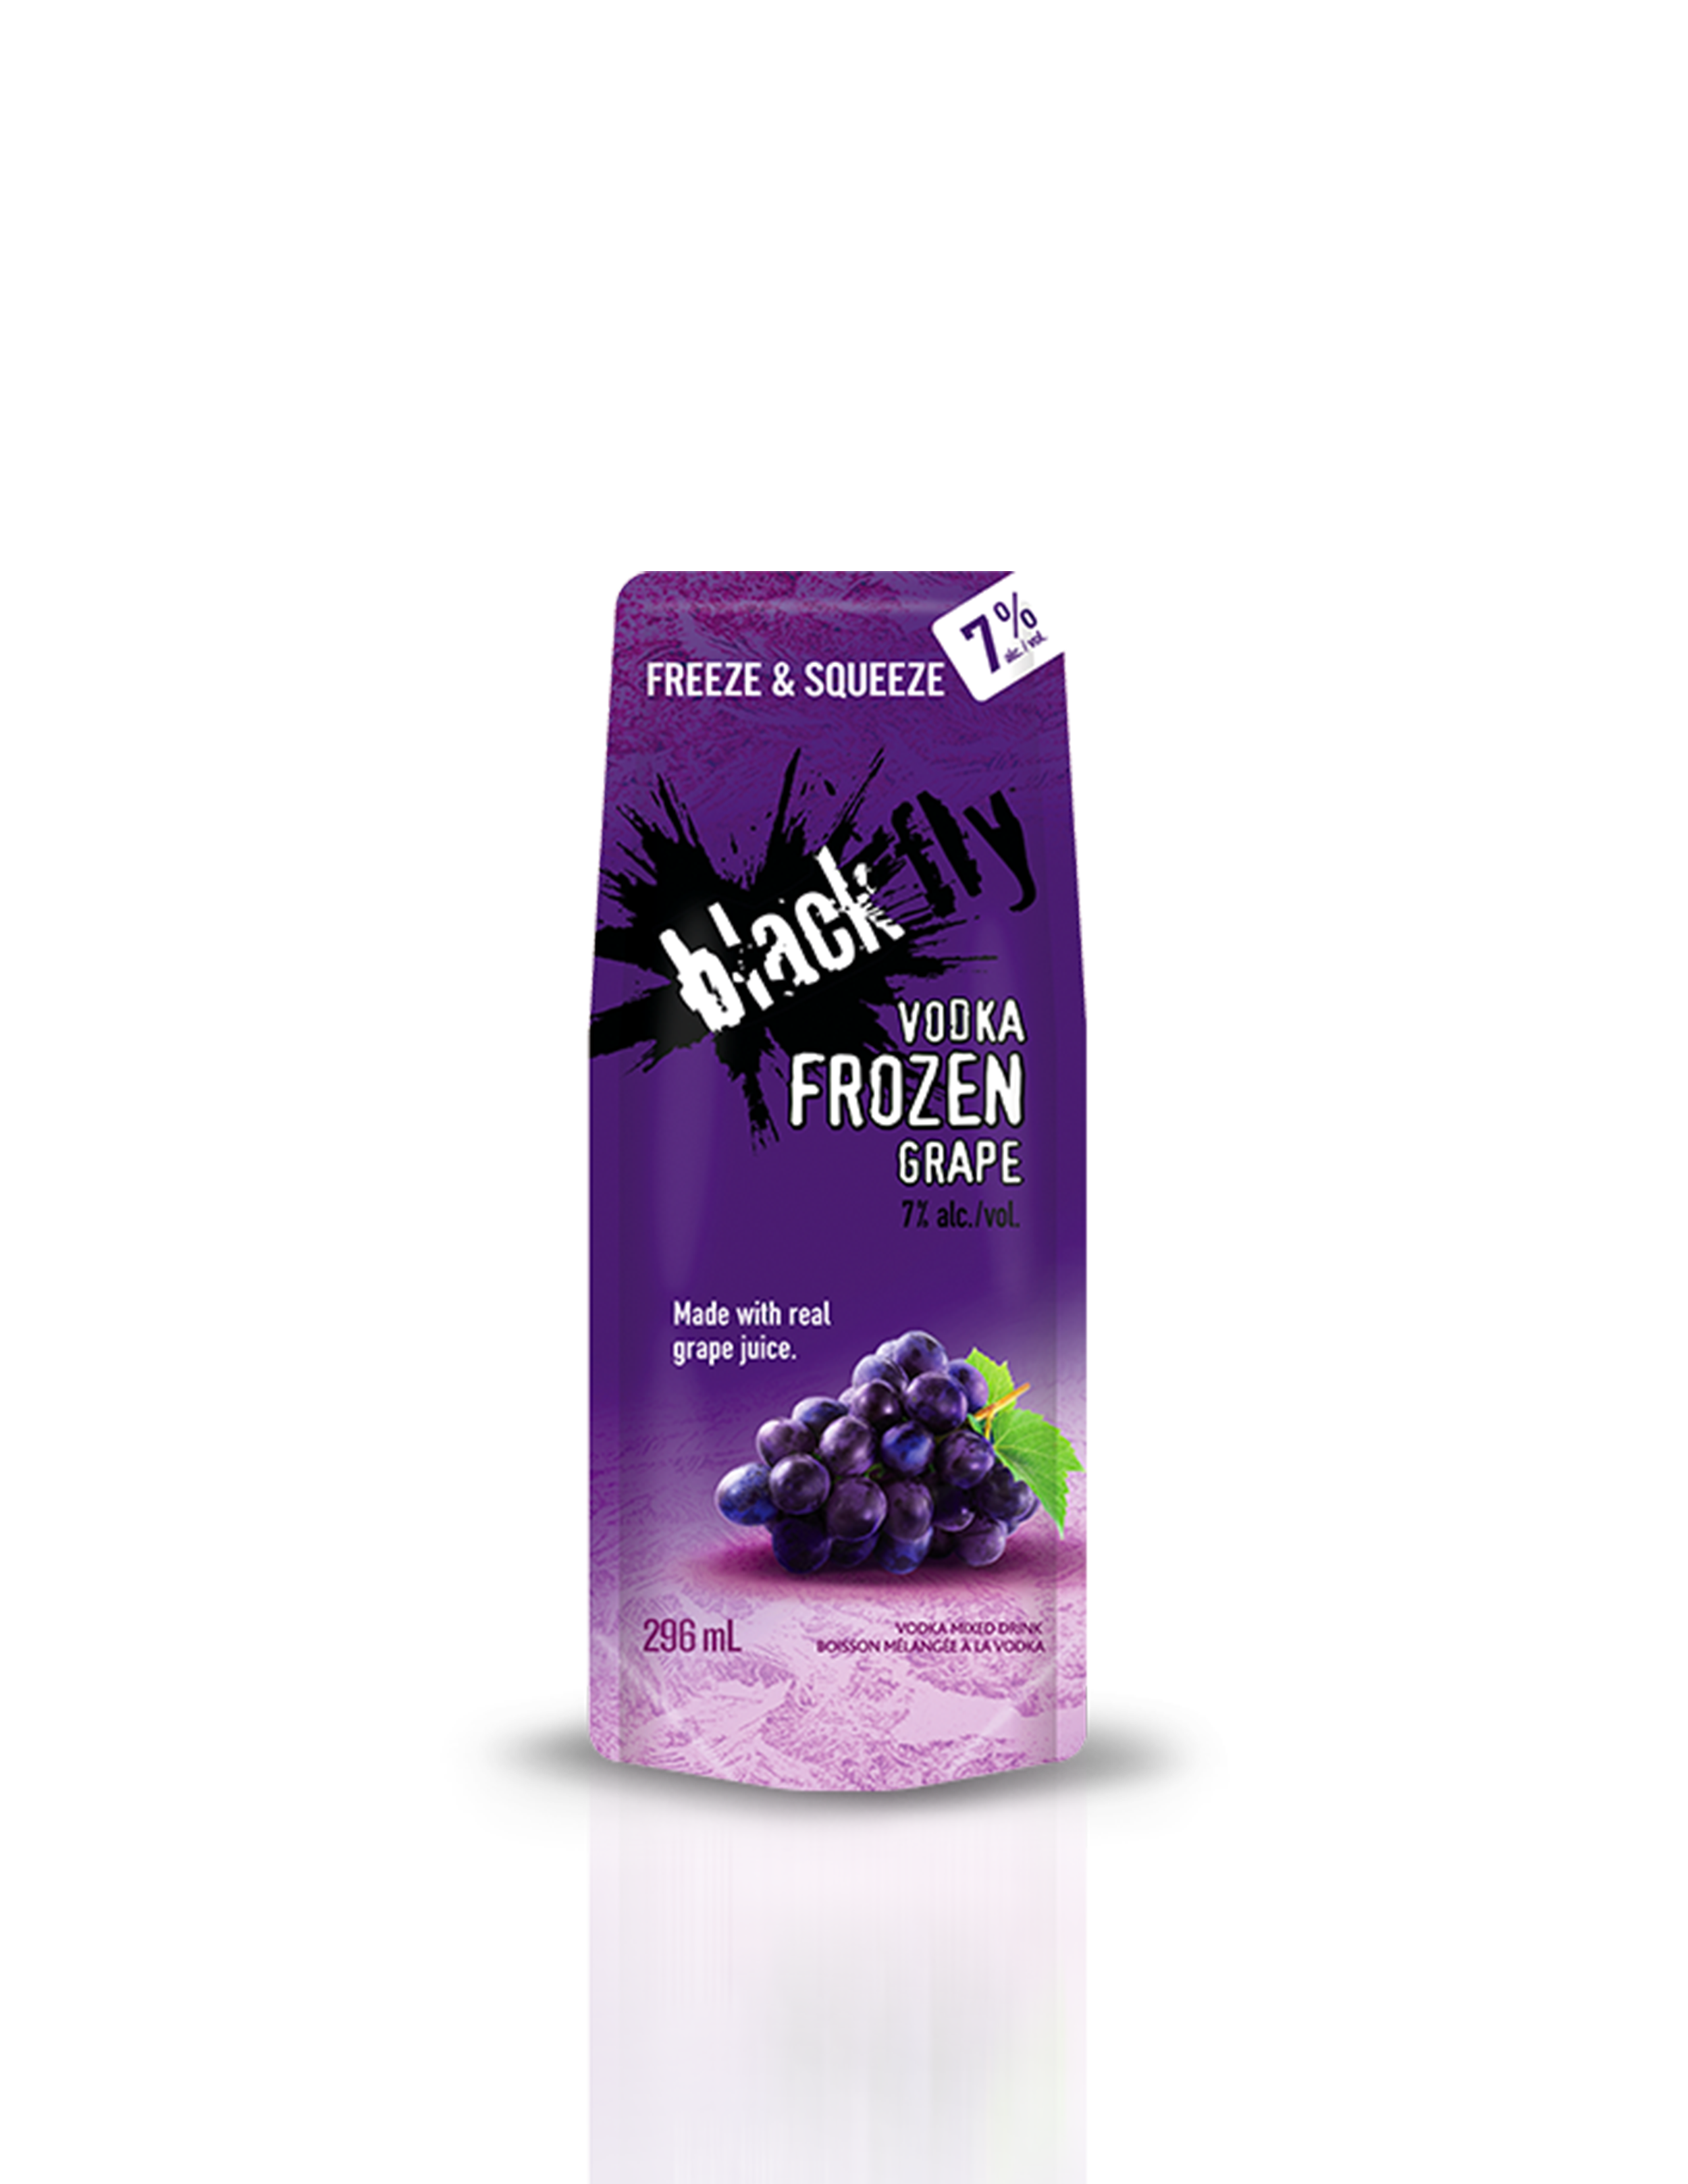 BFB_Microsite3_Product_FrozenGrape.png